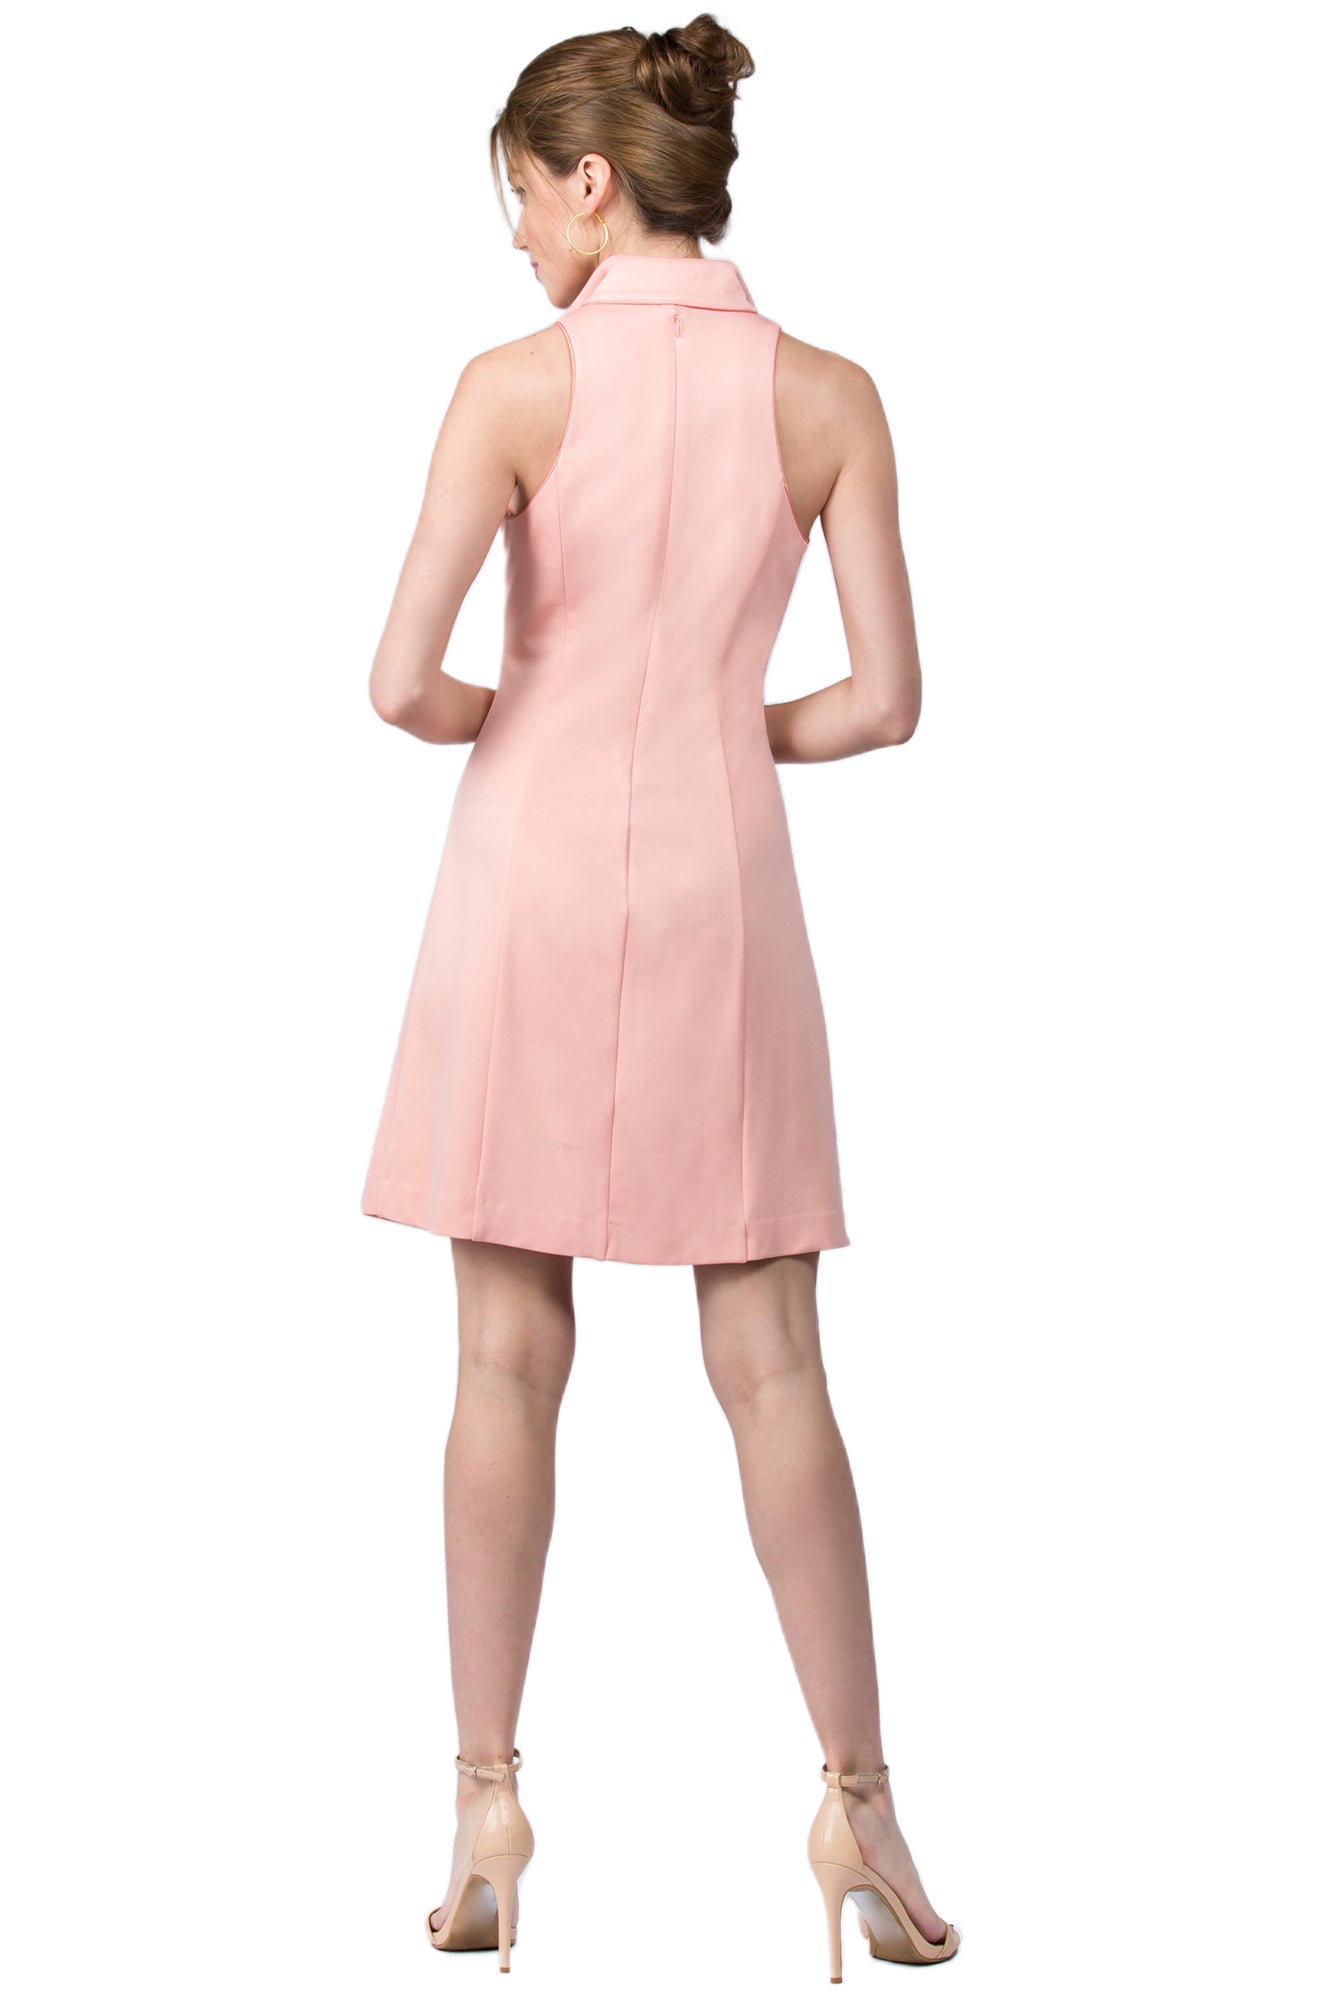 Back view of model wearing sleeveless racer neck peachy pink short fit and flare wing tip collar dress with corset lace up ties at front waist.